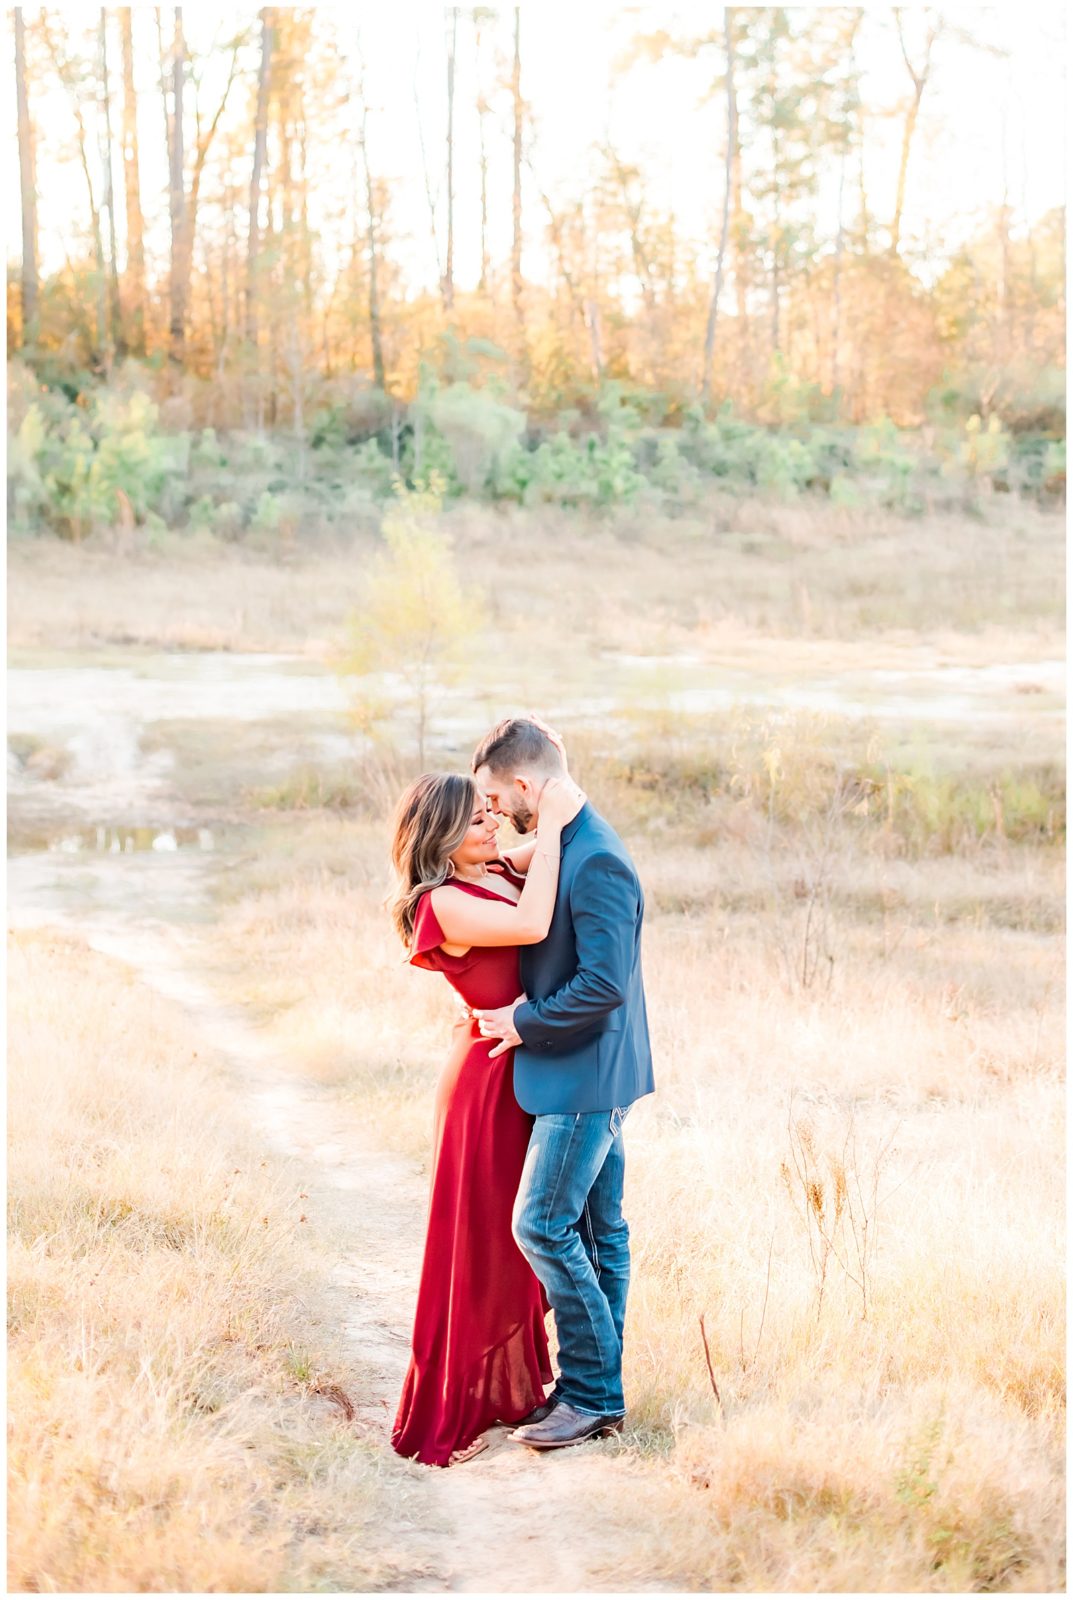 Wedding and Engagement photography in Houston, The Woodlands, Texas